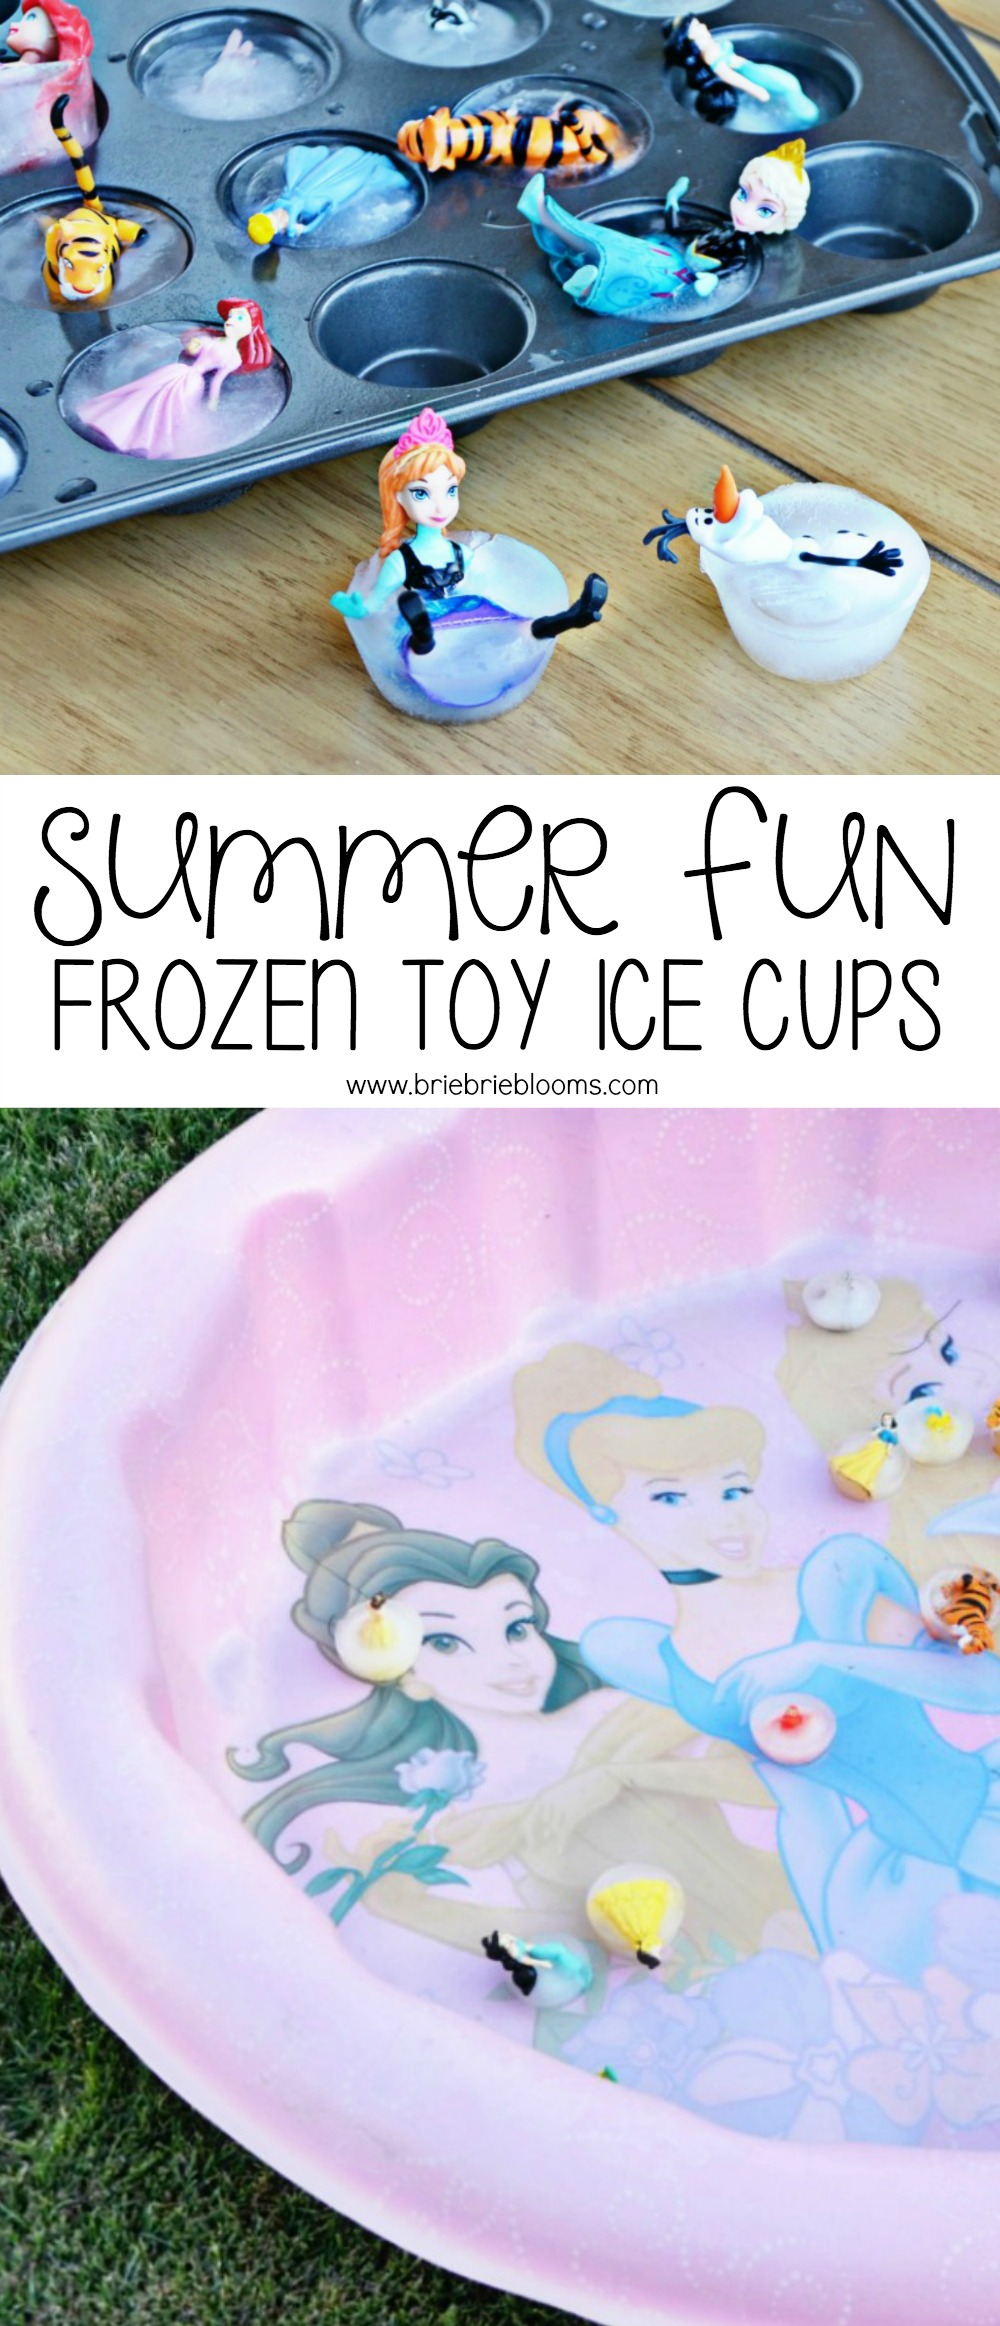 Make frozen toy ice cups with small character toys and a muffin tin for summer fun.